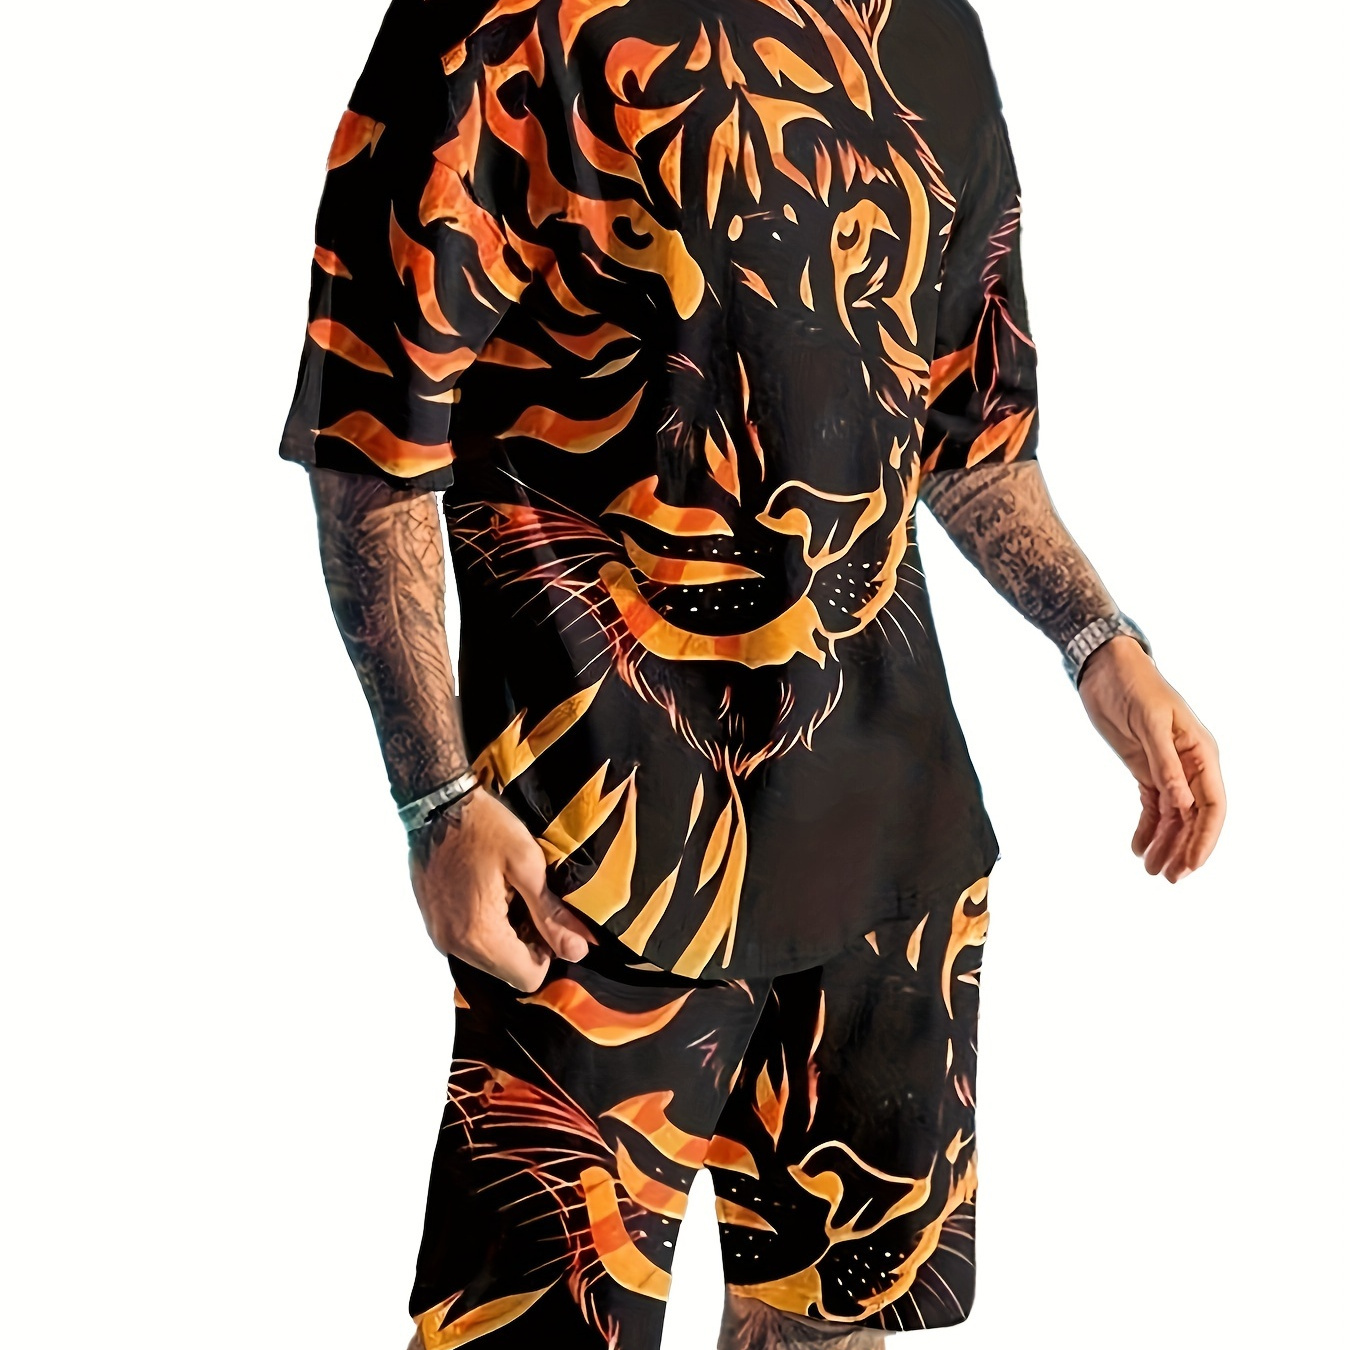 

Cool Tiger Print Men's Fashion Loungewear Set, Short Sleeve Crew Neck Graphic T Shirt Top & Drawstring Waist Shorts Pajamas Set, 2pcs Men's Daily Casual Sports Outfits Tracksuit For Summer